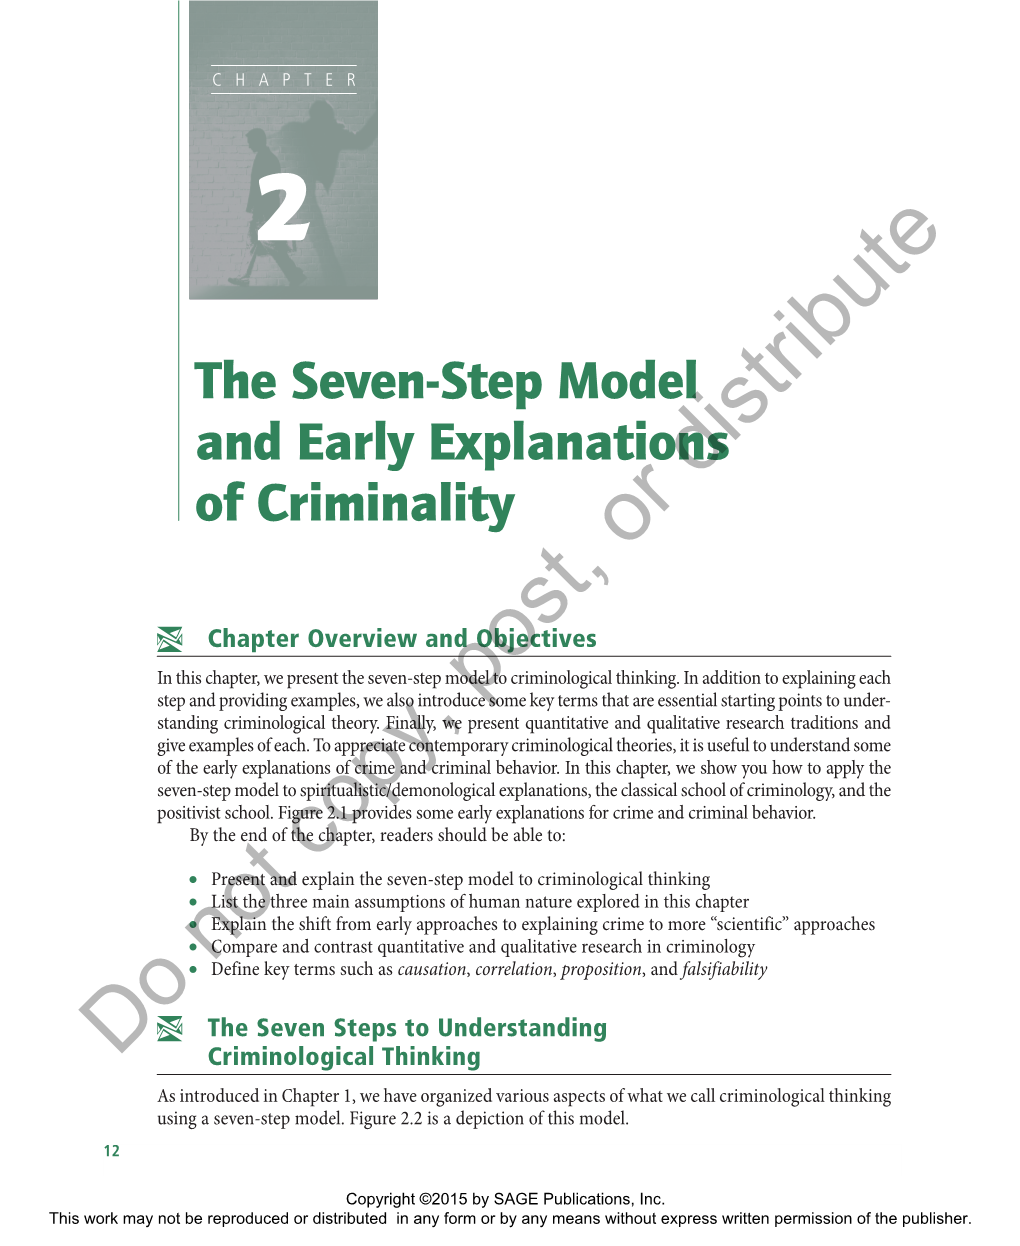 The Seven-Step Model and Early Explanations of Criminality 13